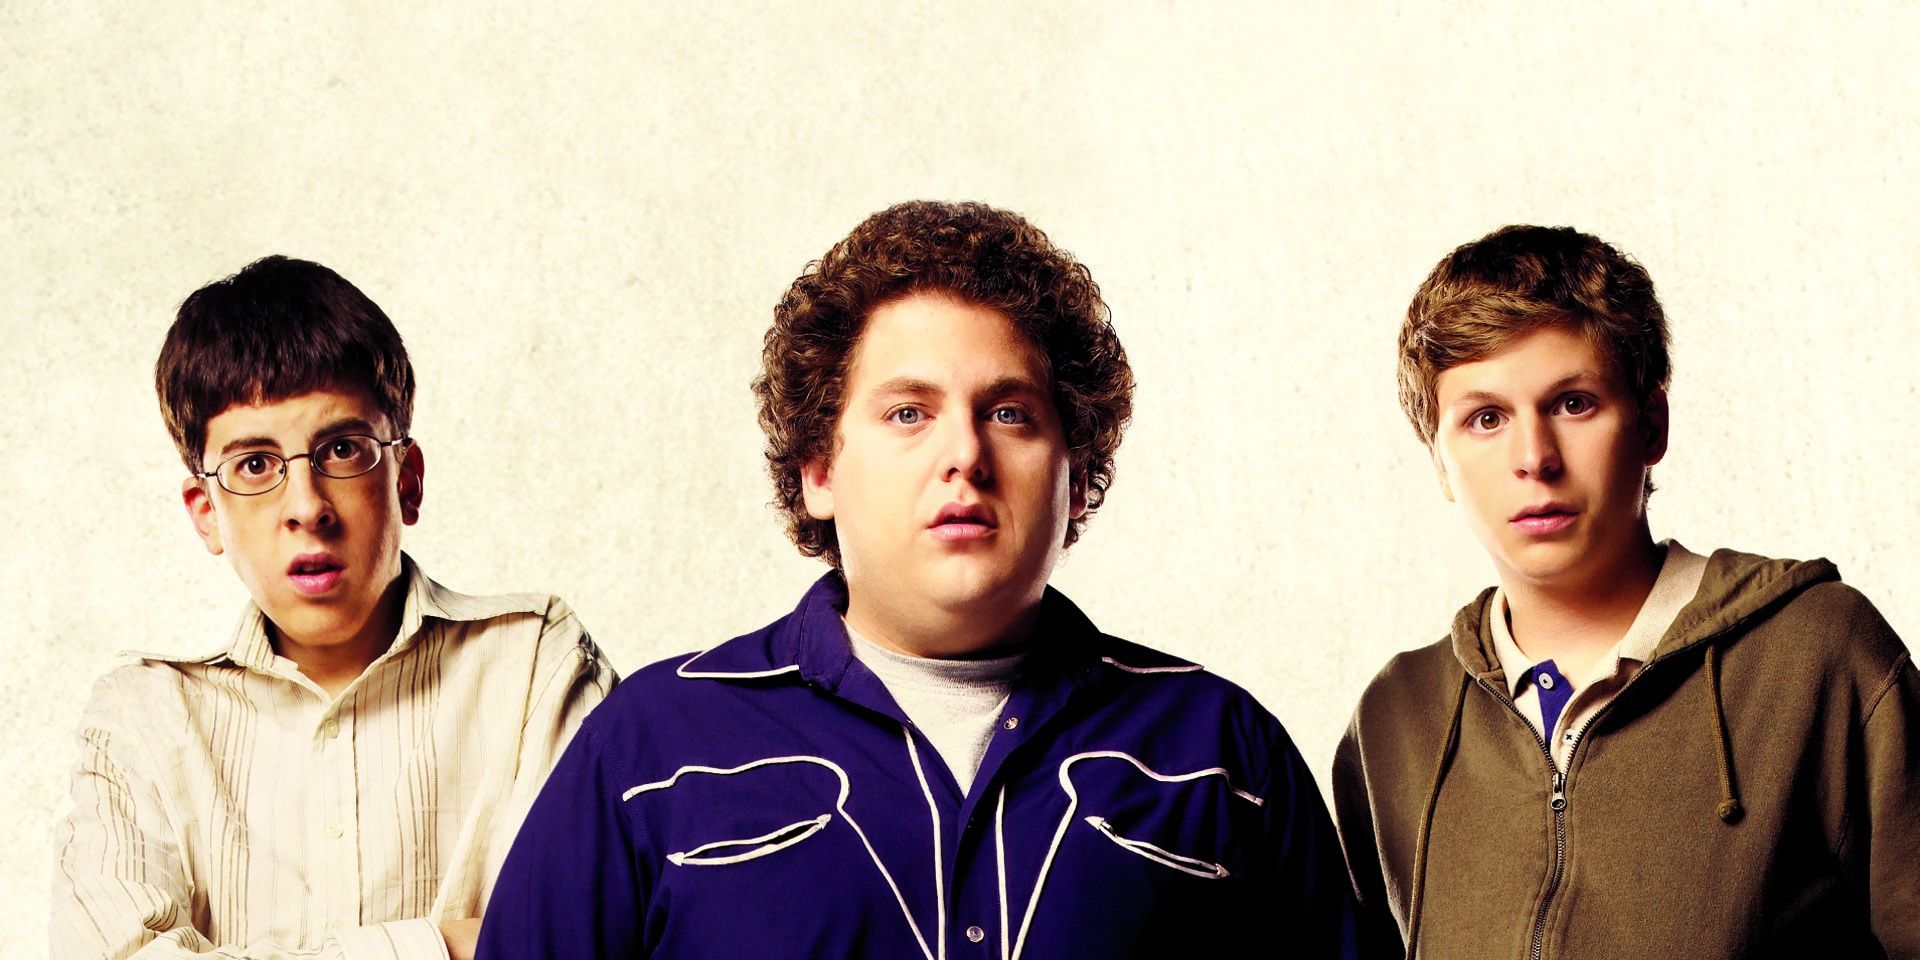 Jonah Hill, Michael Cera and Christopher Mintz-Plasse in the poster for Superbad